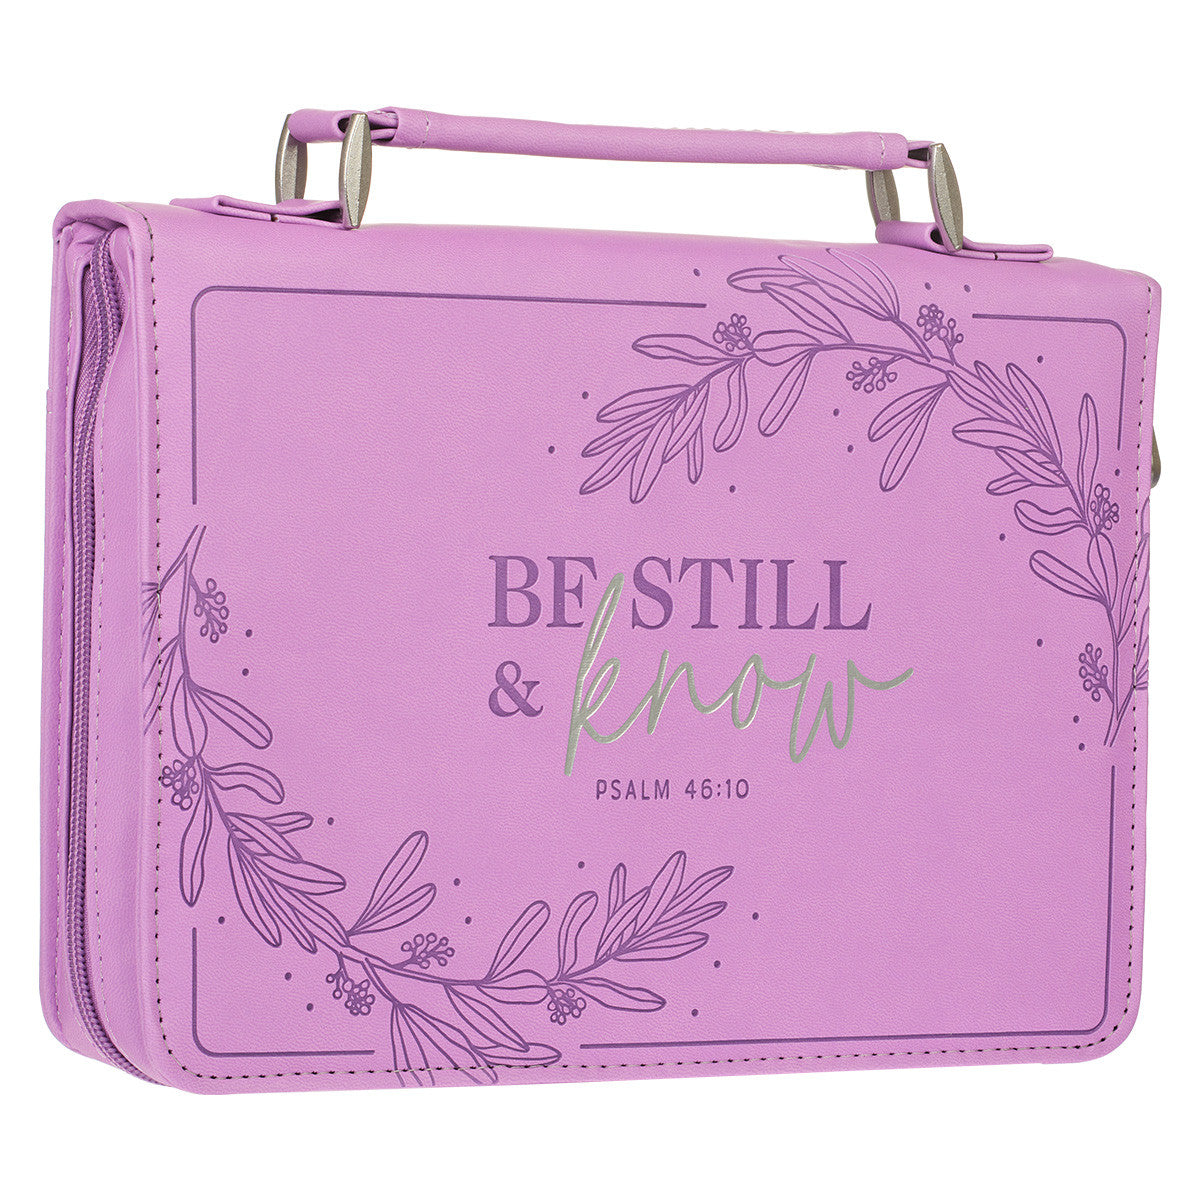 Be Still & Know Purple Laurel Faux Leather Fashion Bible Cover - Psalm 46:10